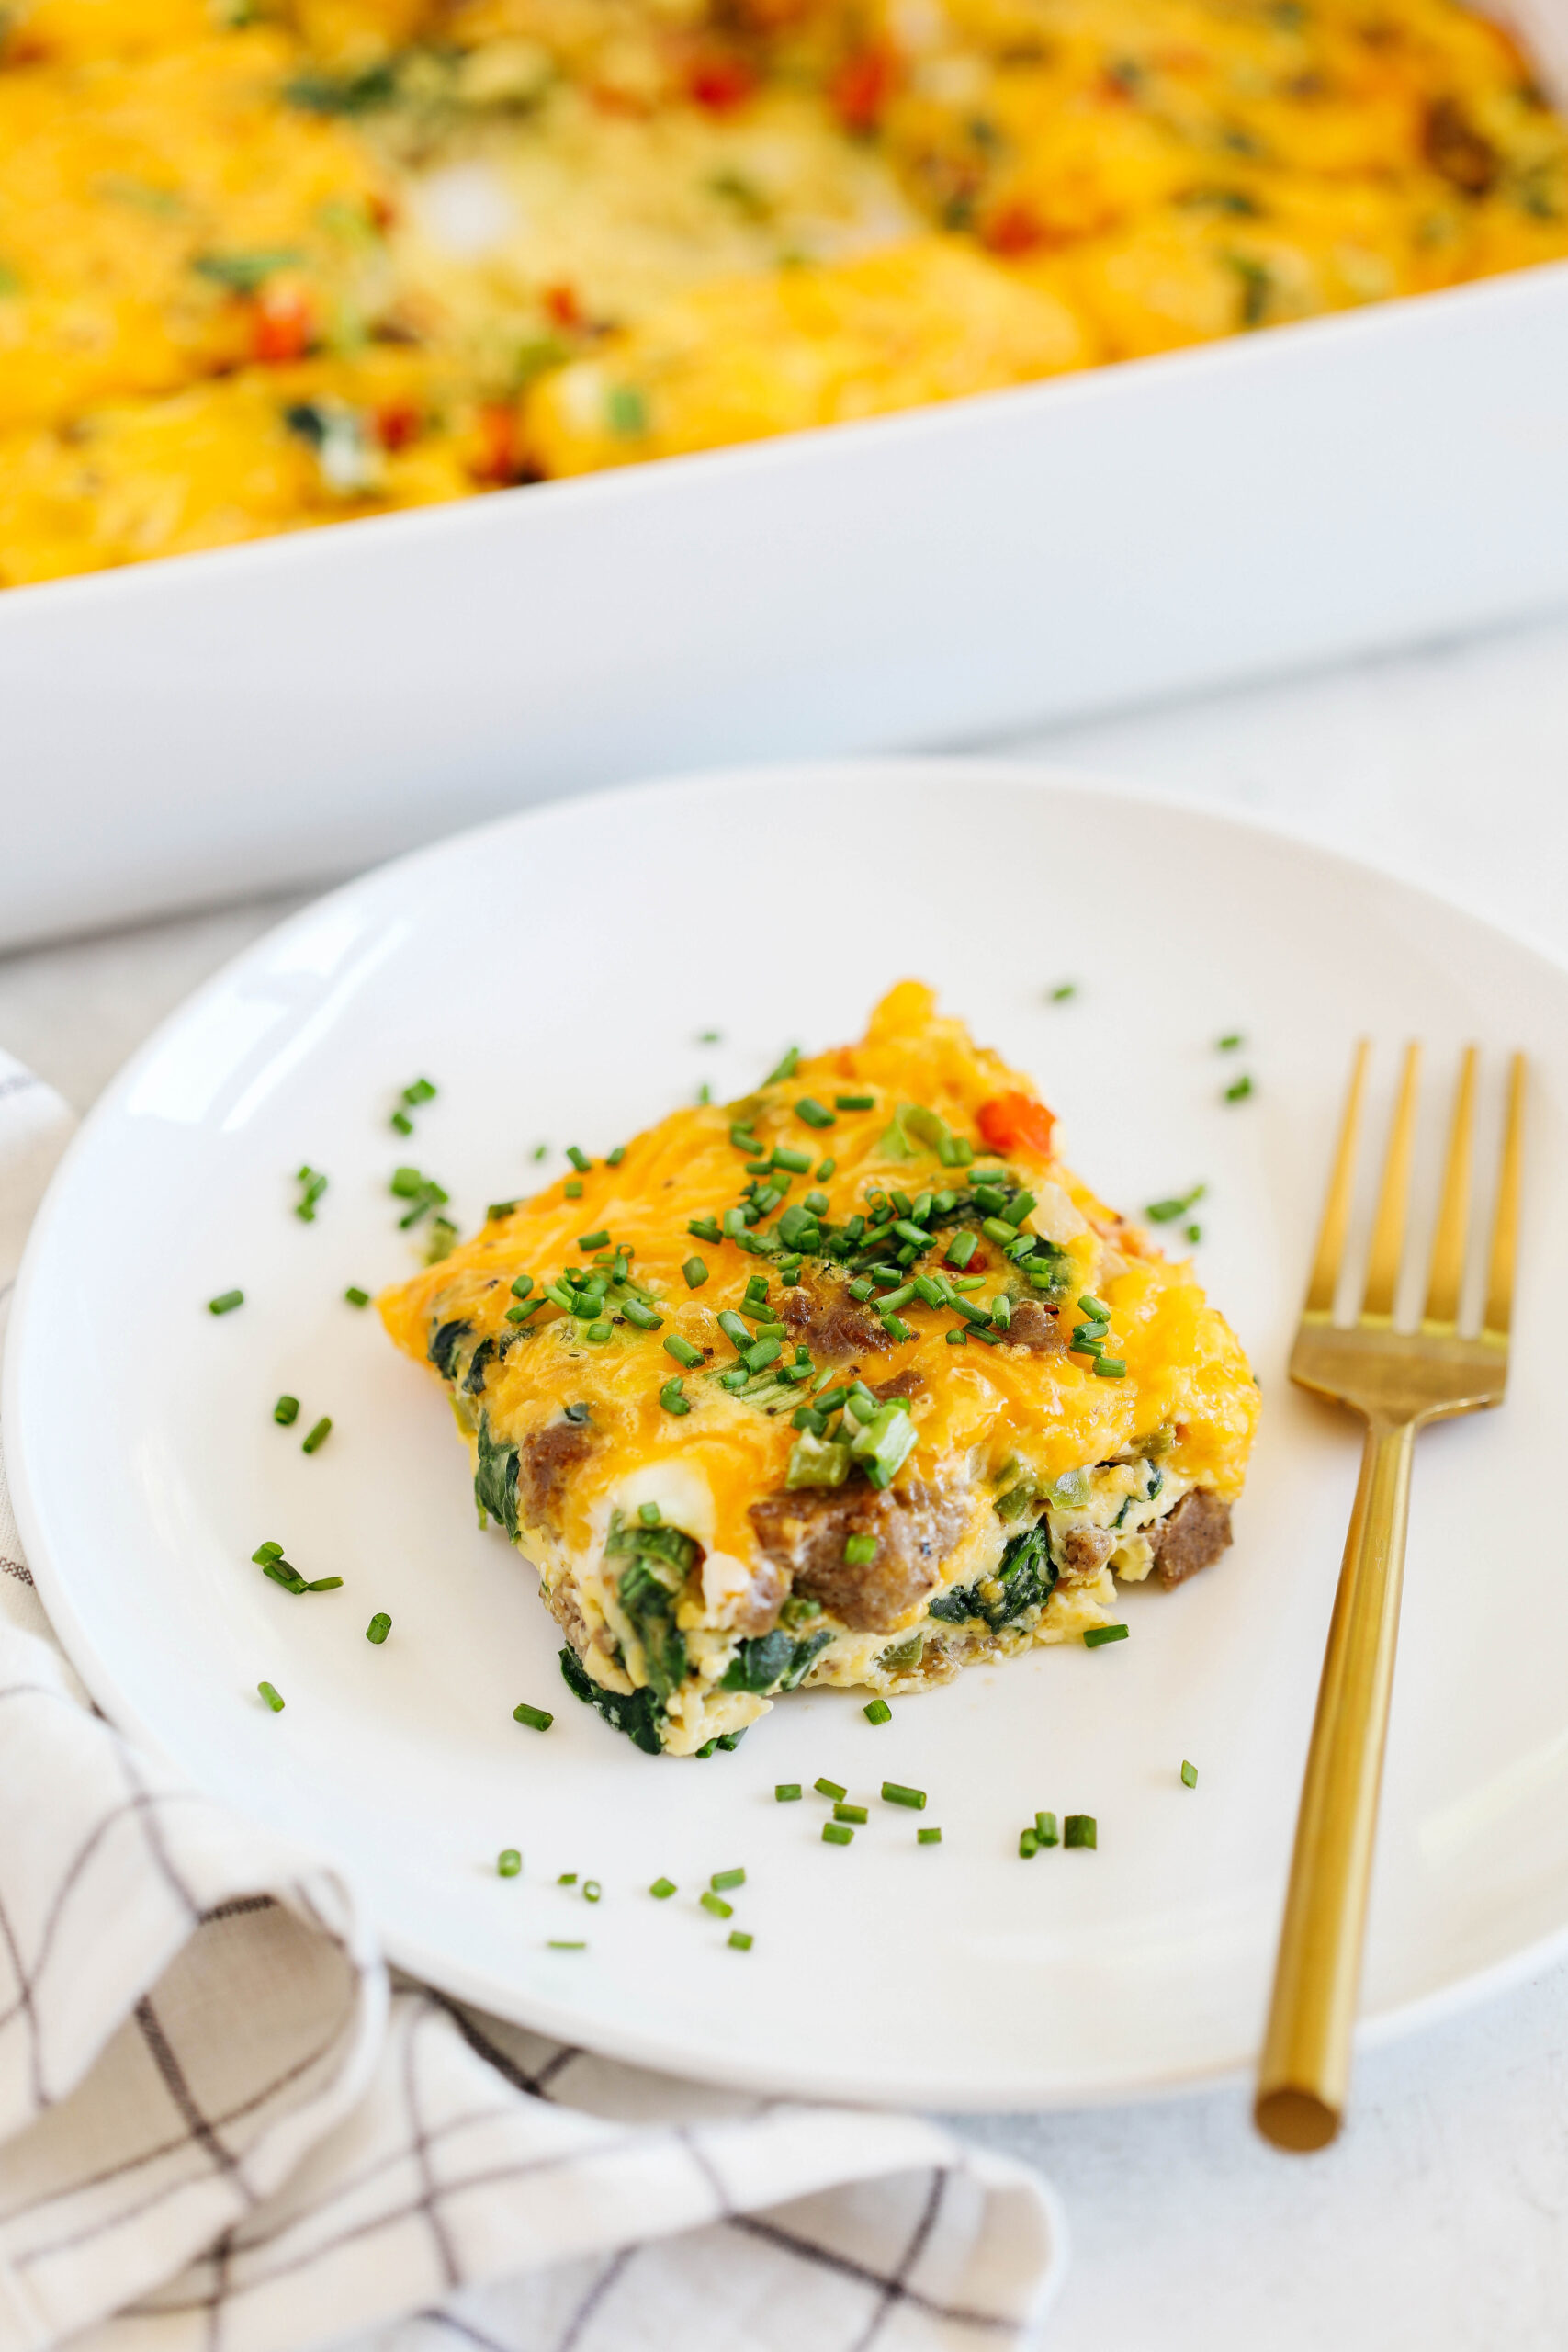 This Sausage and Veggie Egg Casserole makes the perfect low carb savory breakfast loaded with your favorite veggies, leafy greens, and delicious turkey sausage that is sure to be a crowdpleaser!